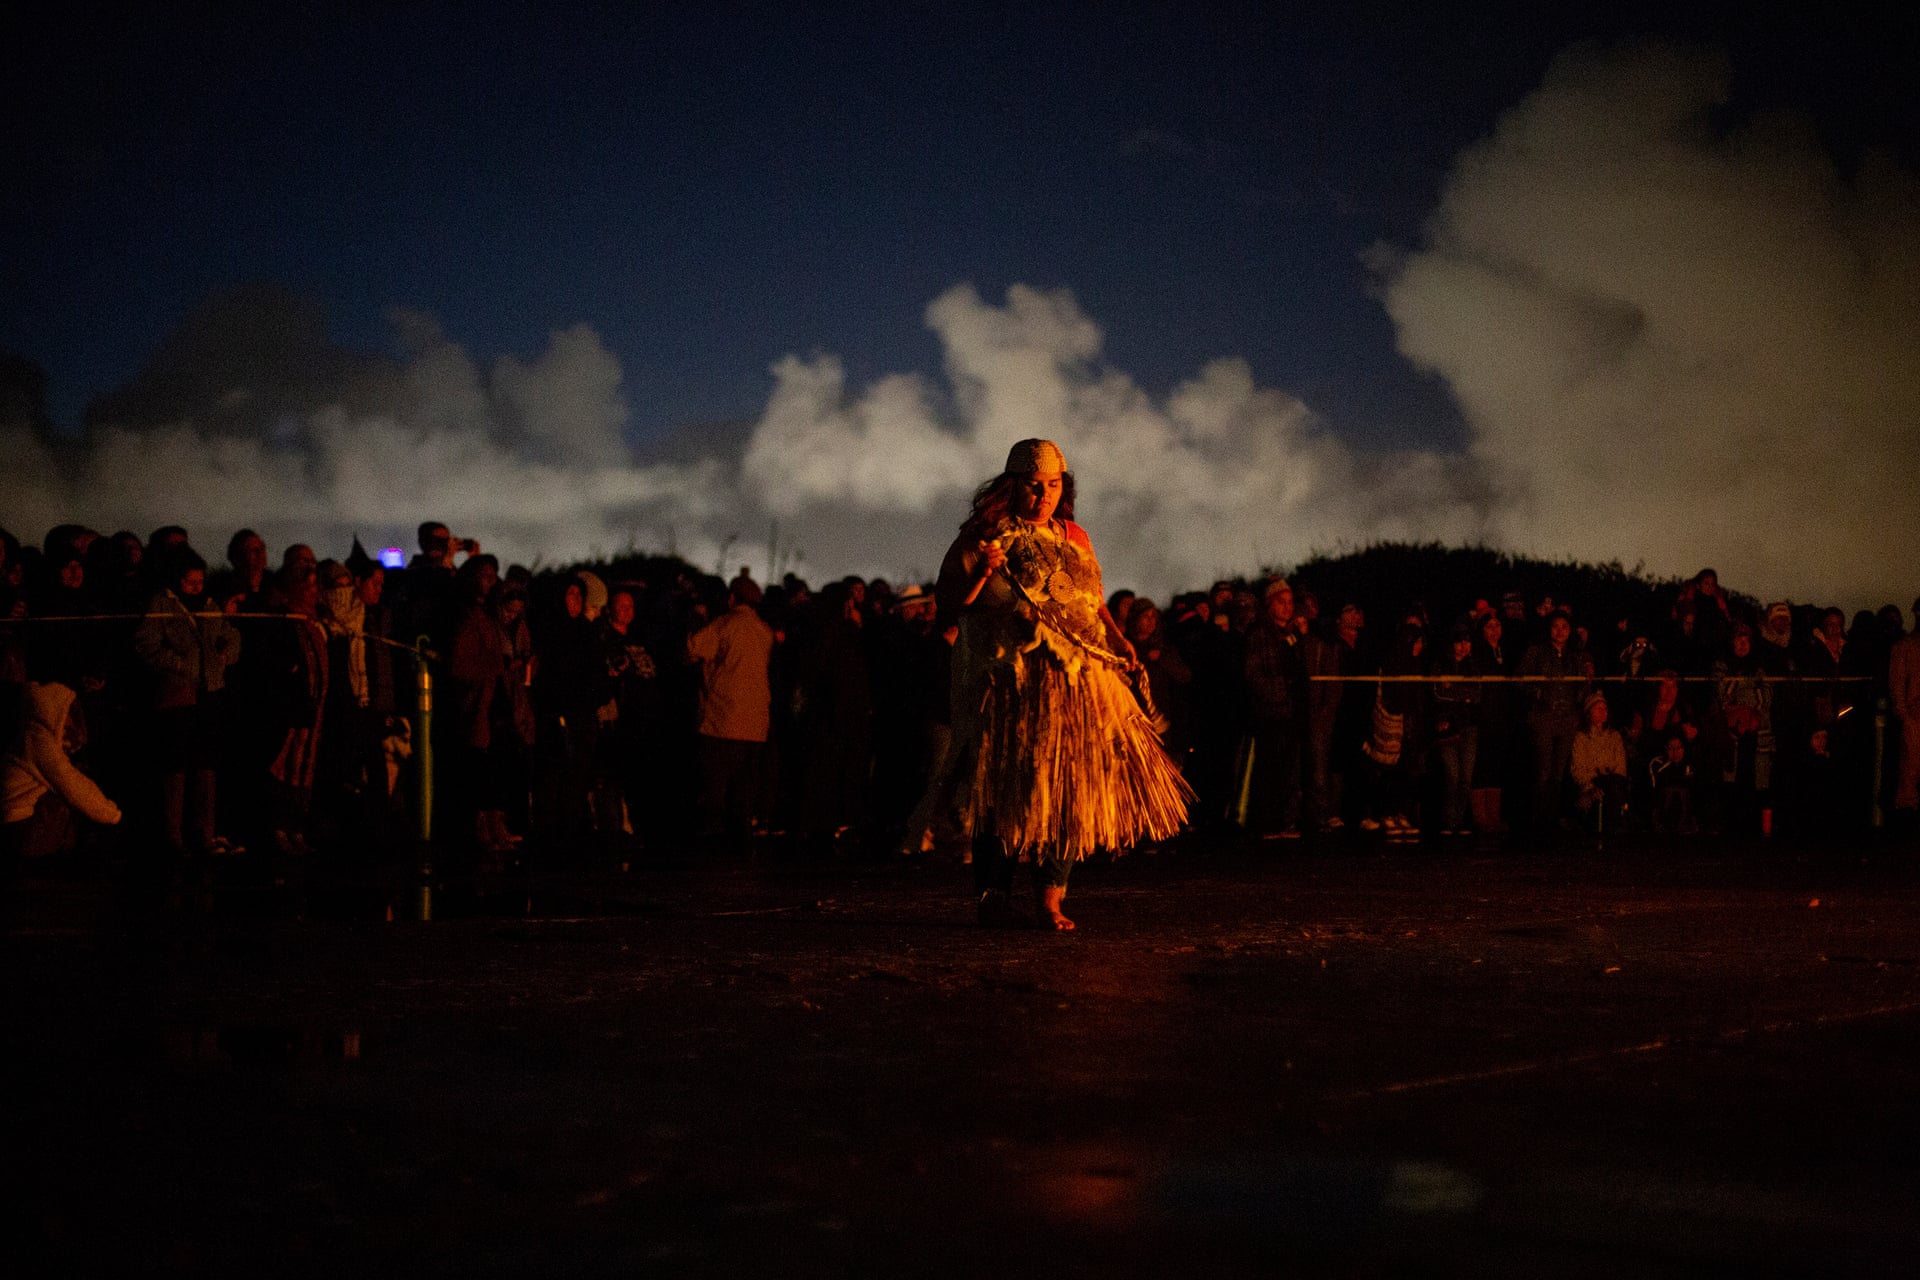 Color photograph showing a large crowd outside. A female dancer in Native cultural clothing dances at the center of the image.